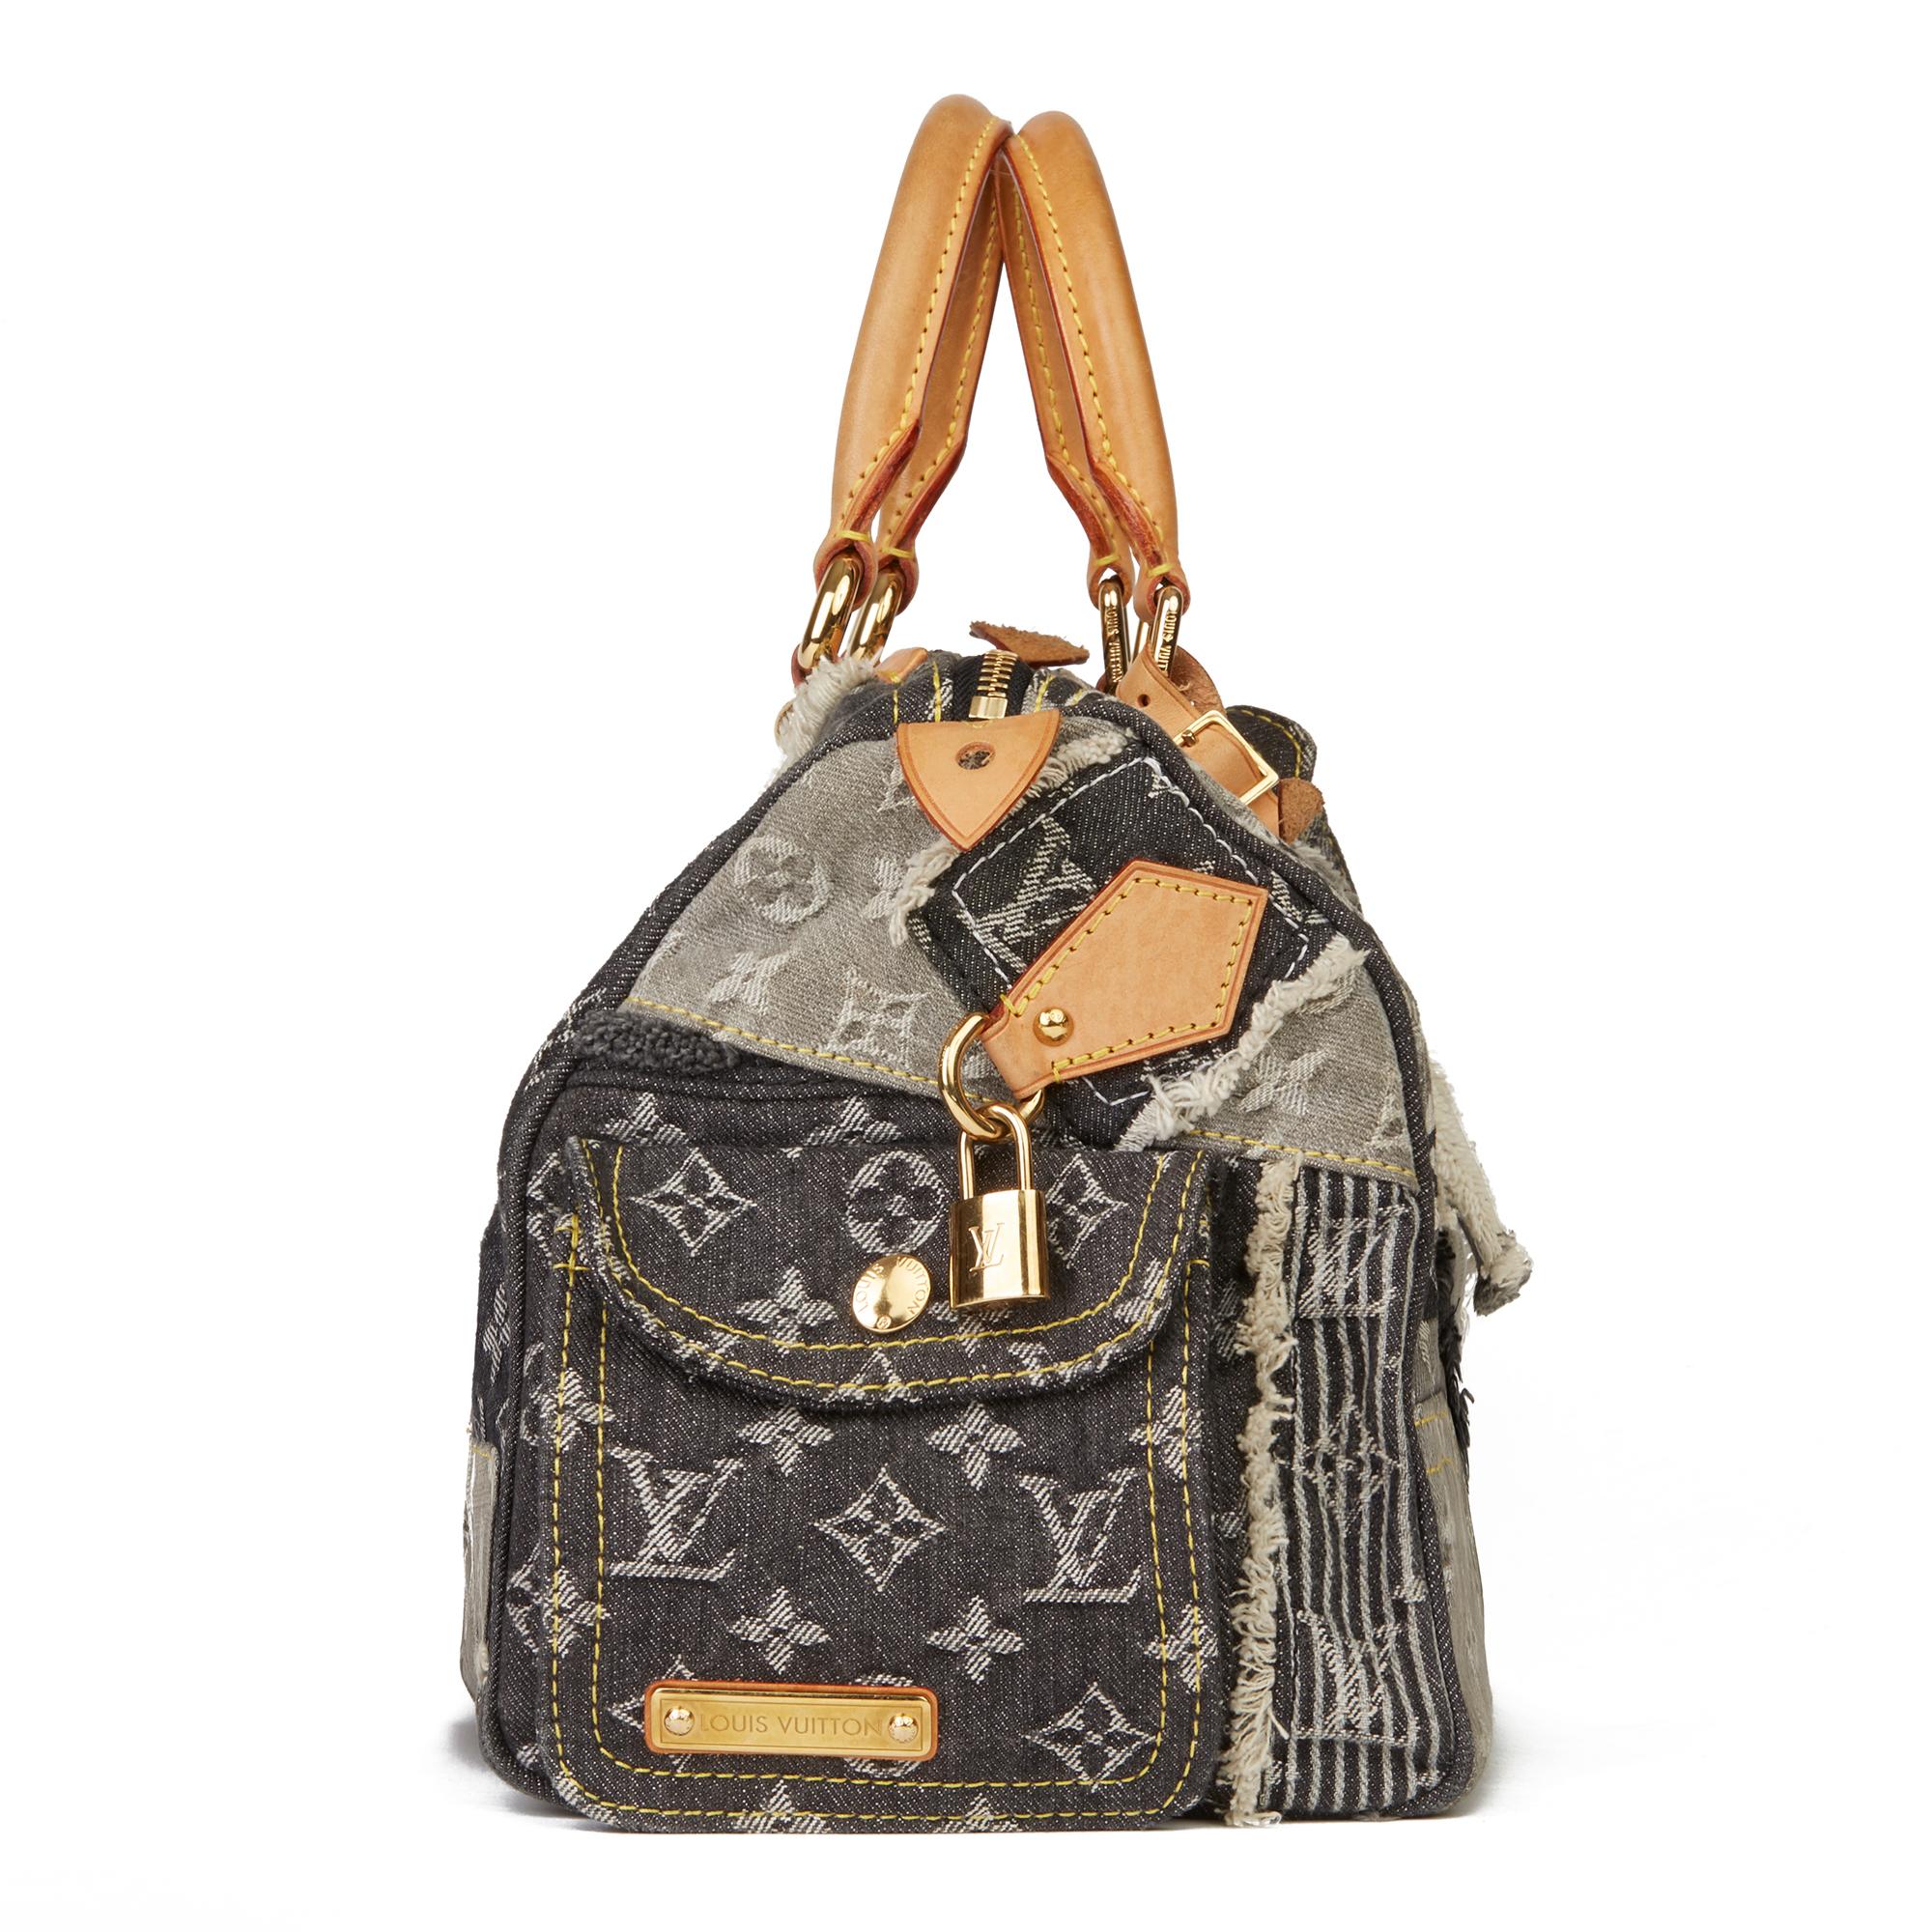 LOUIS VUITTON
Grey Monogram Denim Patchwork Speedy 30cm 

Reference: HB2810
Serial Number: TH2017
Age (Circa): 2007
Accompanied By: Louis Vuitton Dust Bag, Box, Care Booklet 
Authenticity Details: Date Stamp (Made in France)
Gender: Ladies
Type: